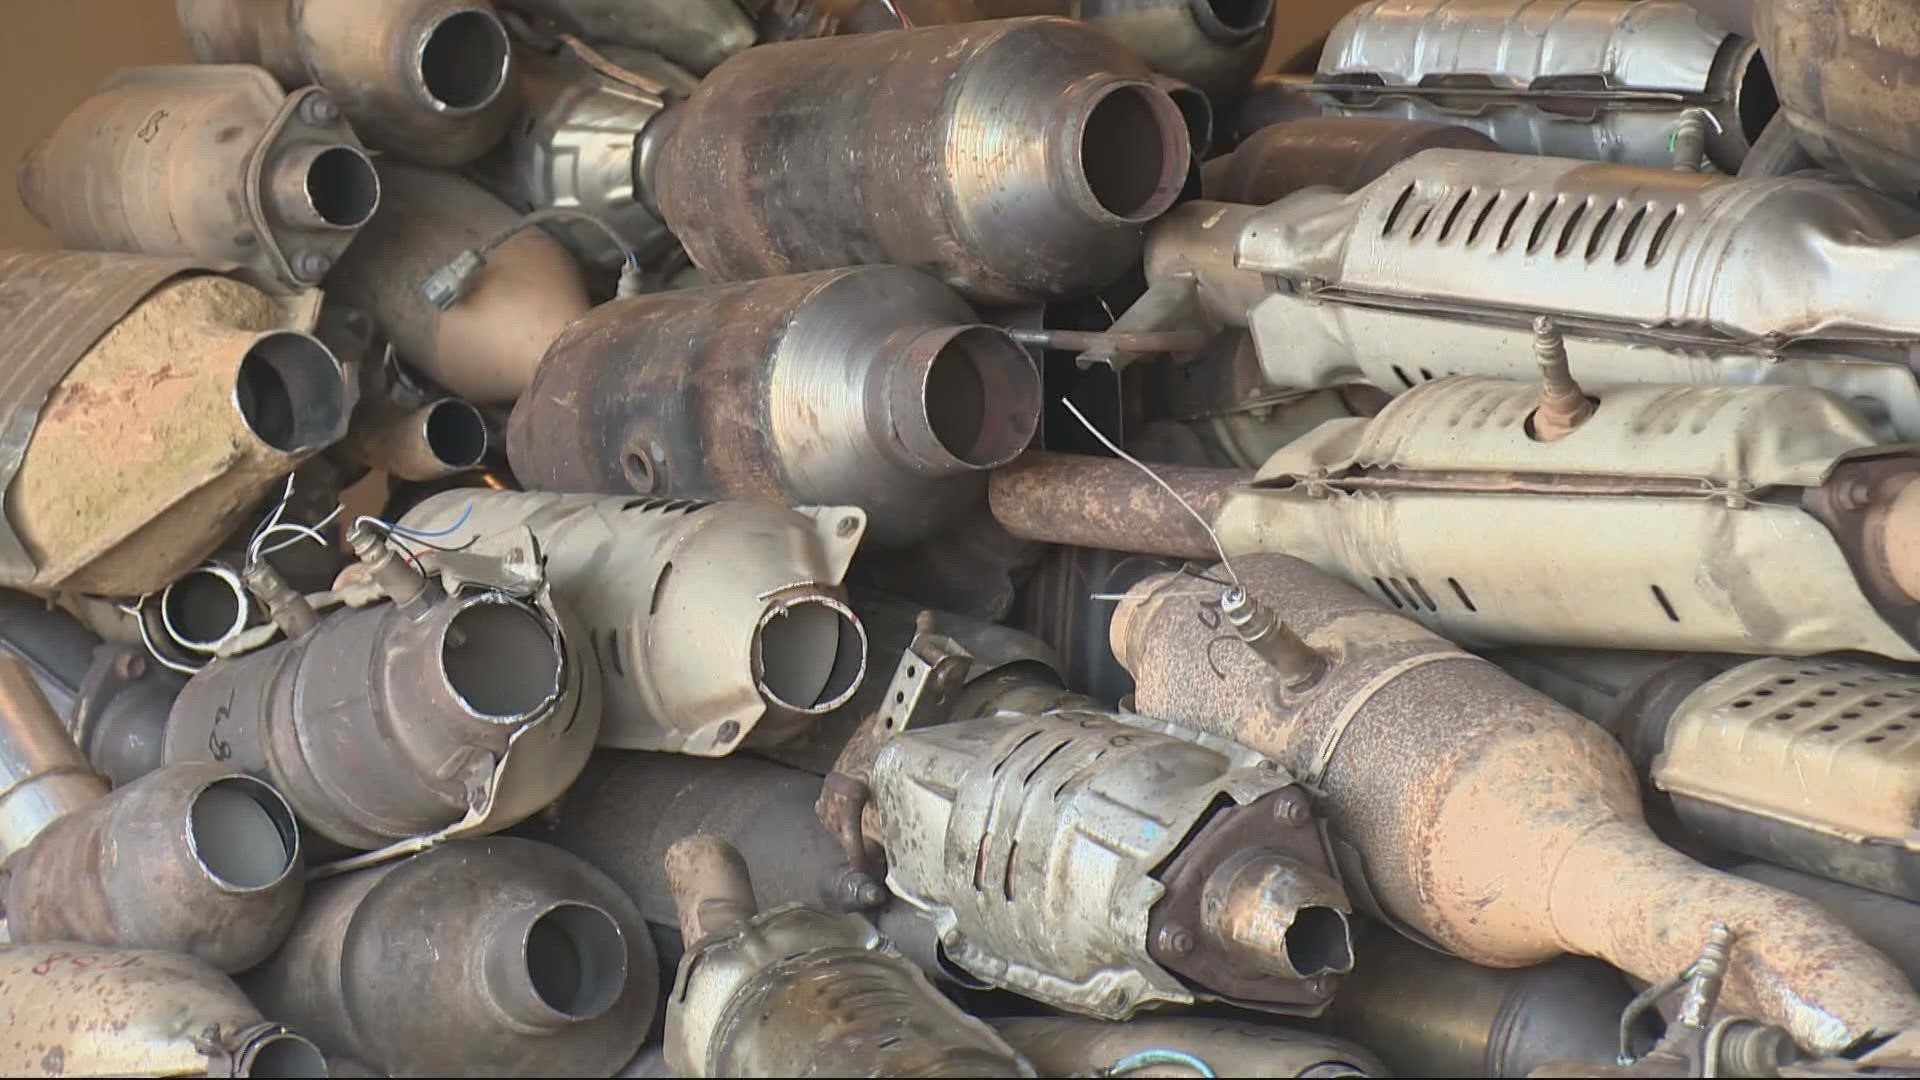 Police said that they charged 14 suspects in connection with the thefts. Around 3,000 catalytic converters were recovered in a series of search warrants.